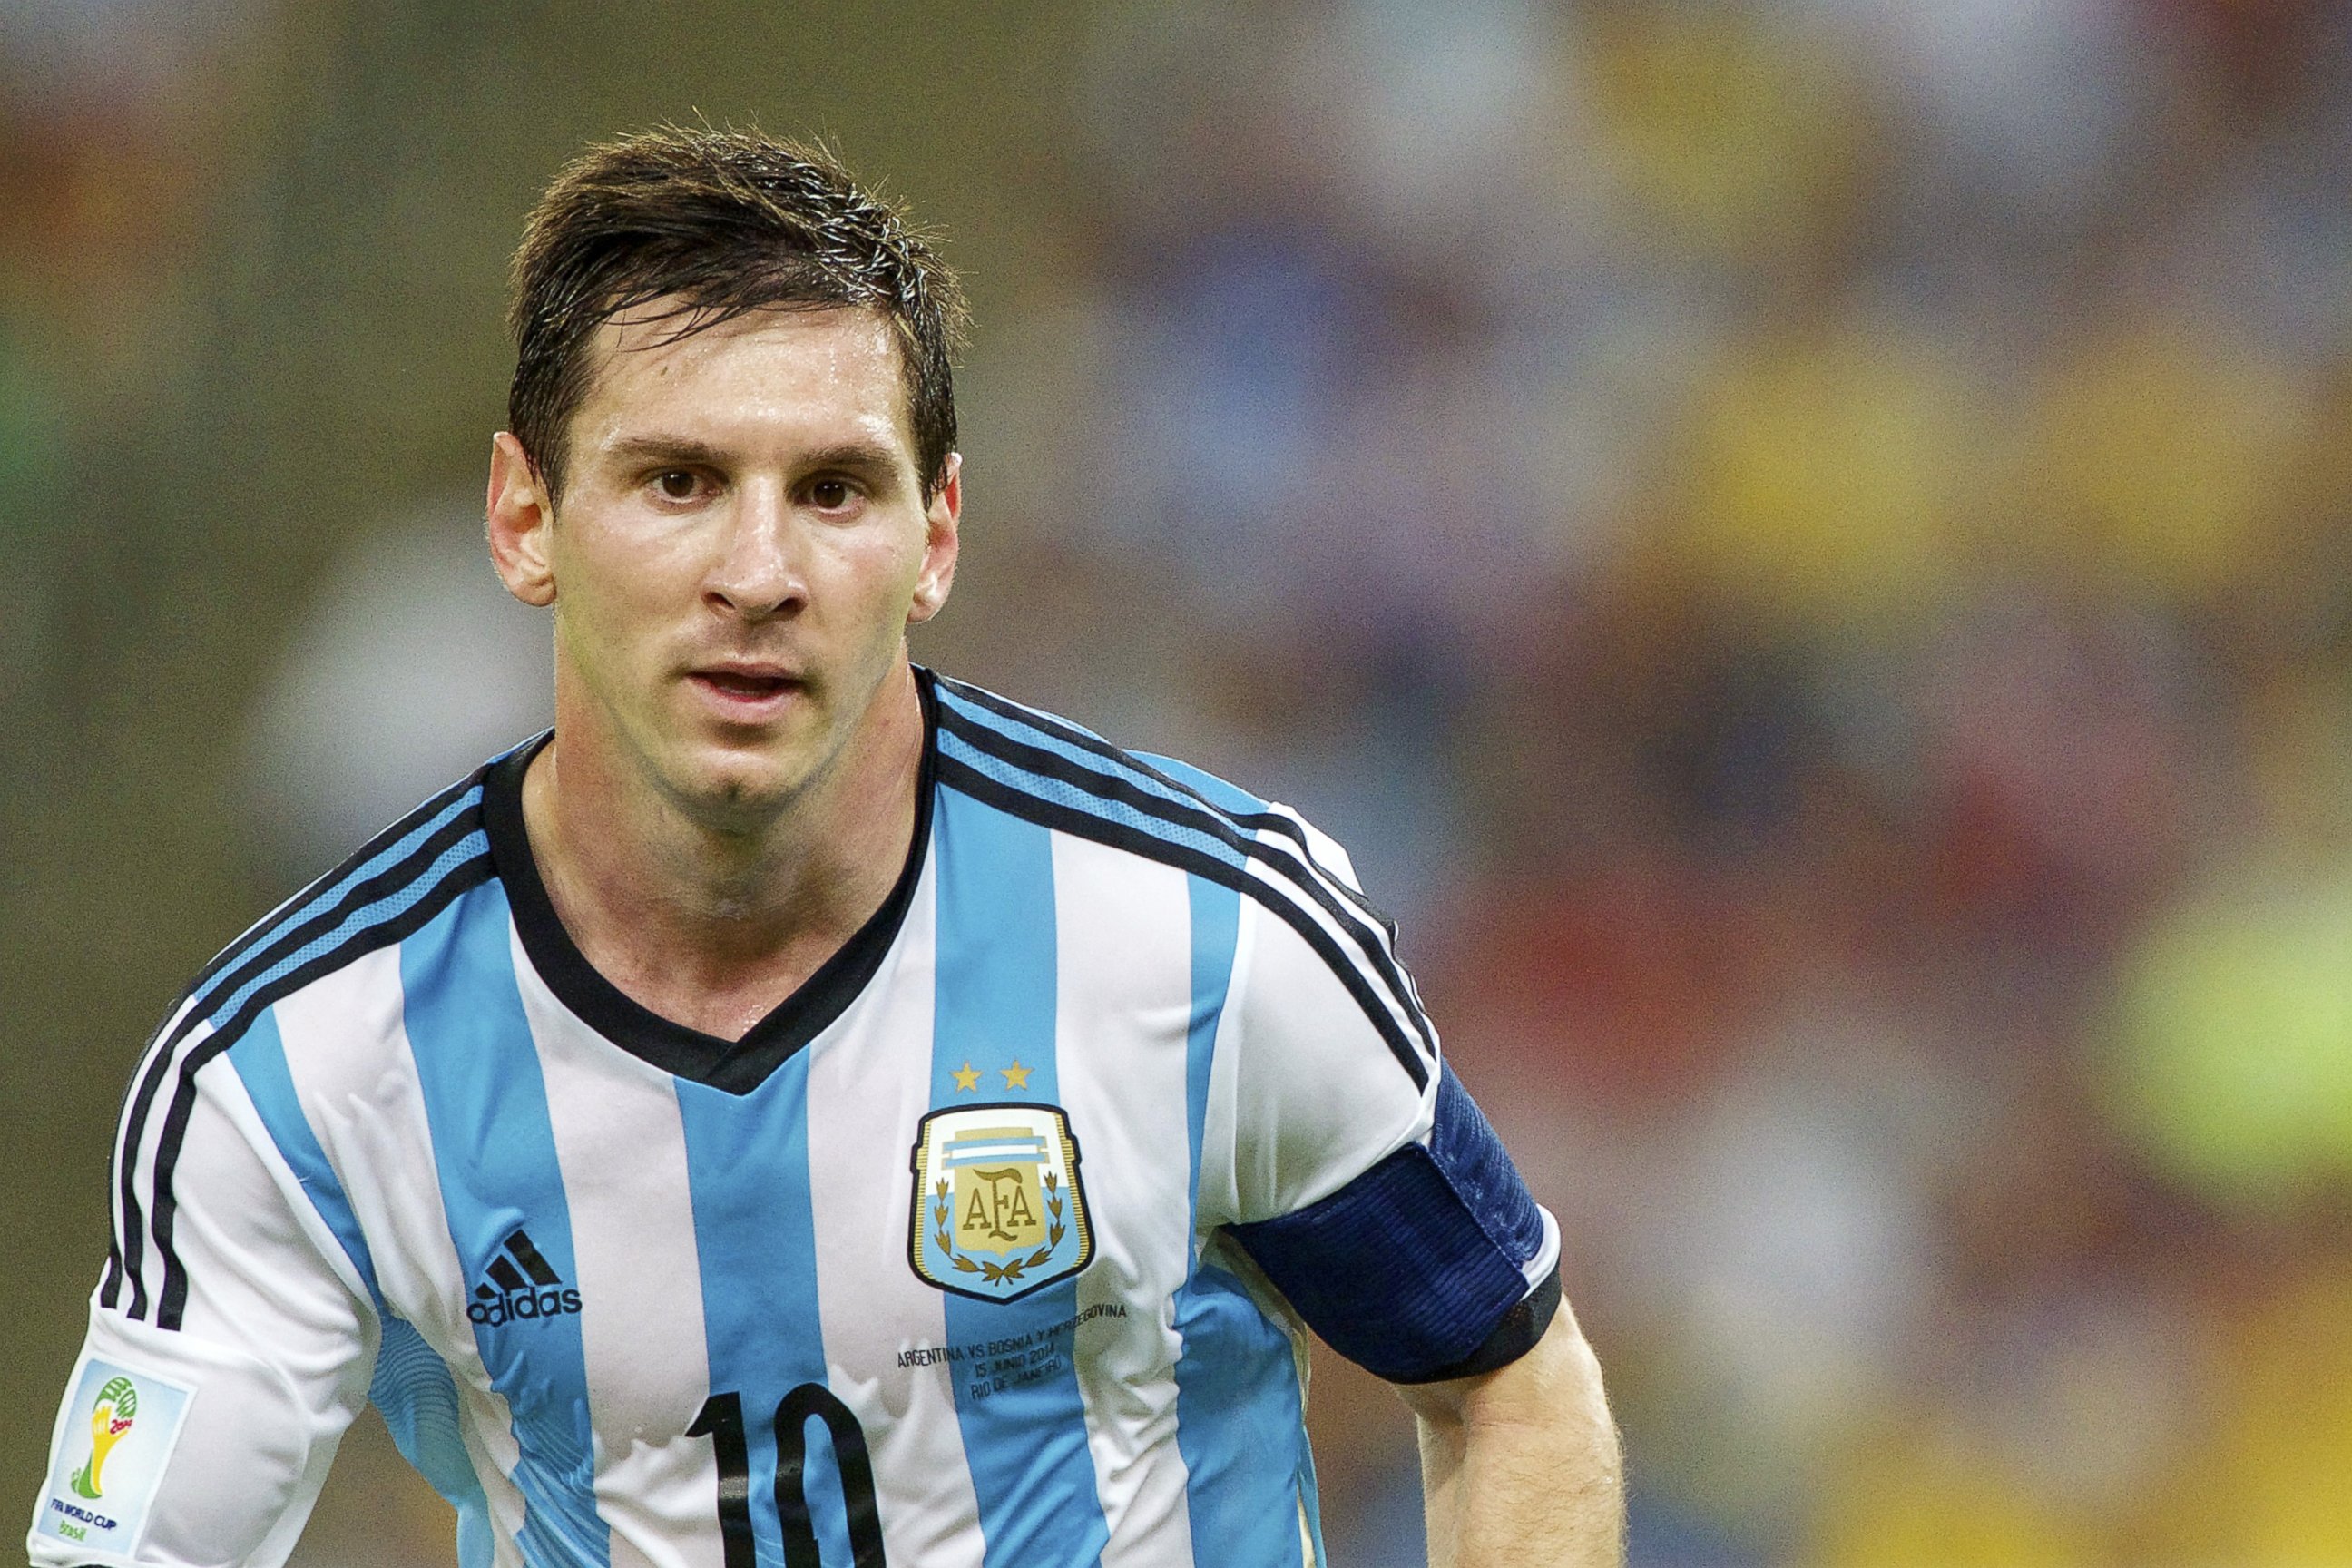 PHOTO: Lionel Messi of Argentina during the FIFA World Cup 2014 match between Argentina and Bosnia and Herzegovina on June 15, 2014 at the Maracano in Rio de Janeiro, Brazil.